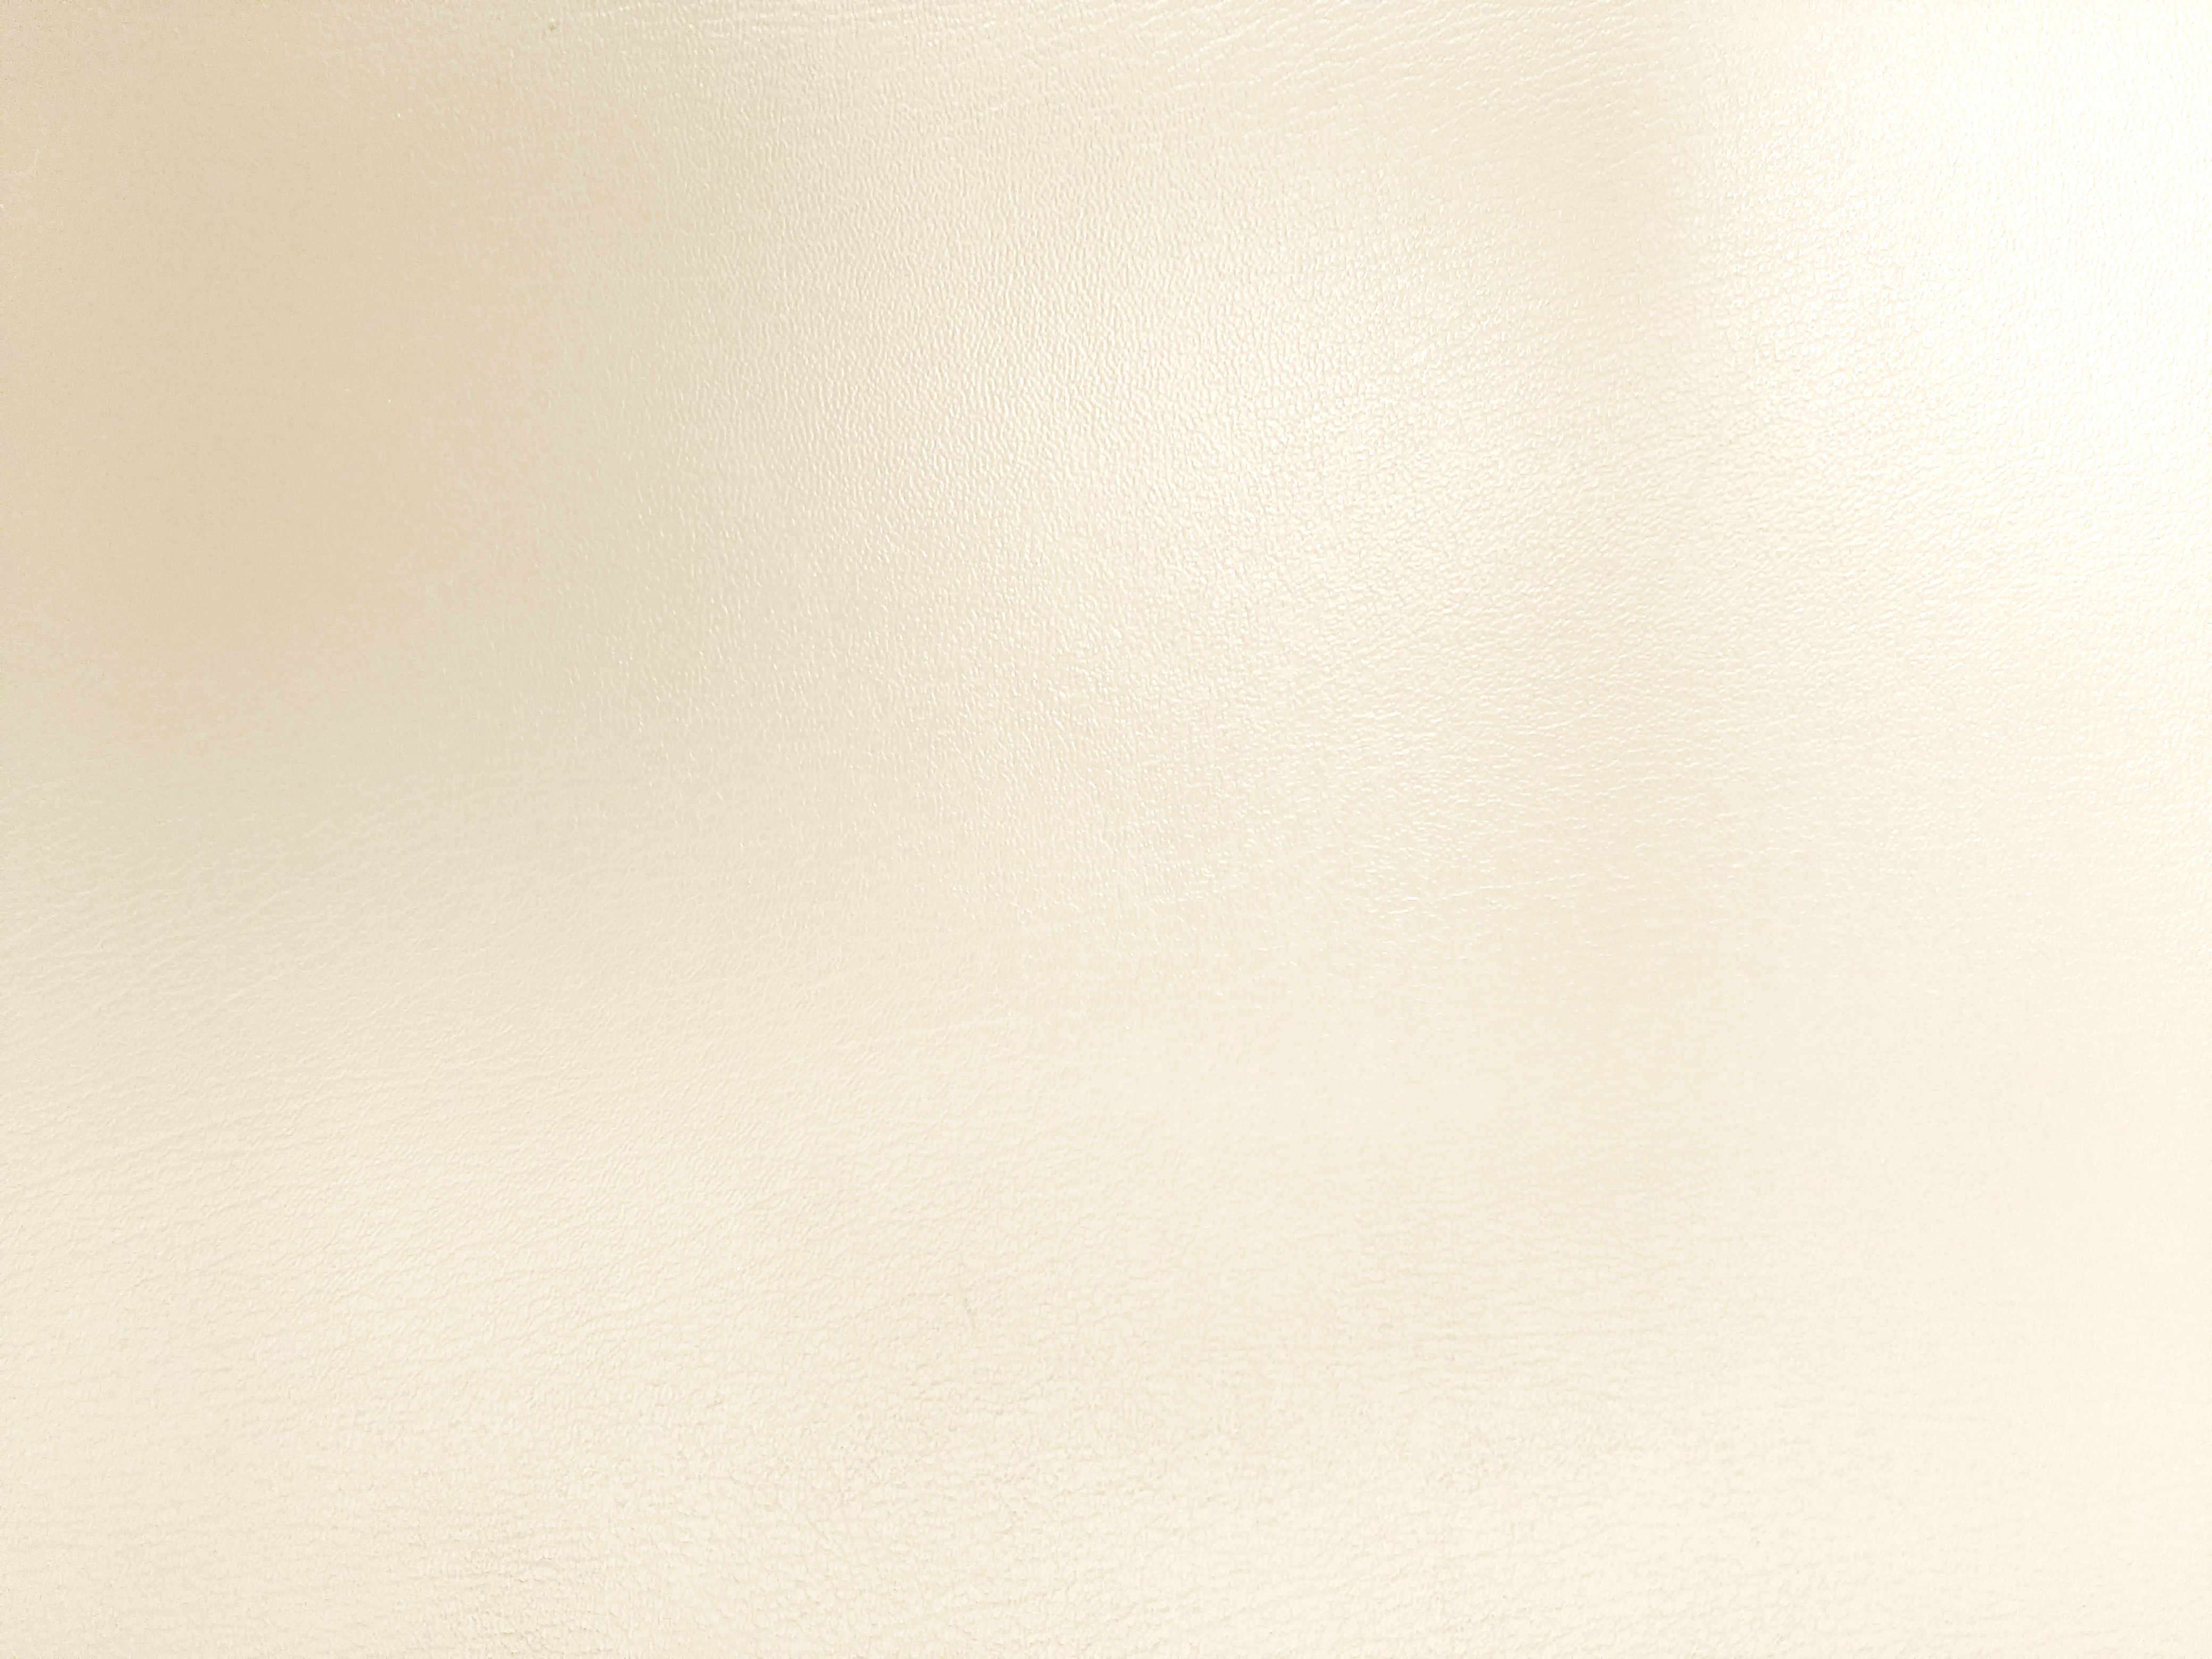 Beige Faux Leather Texture Picture, Free Photograph